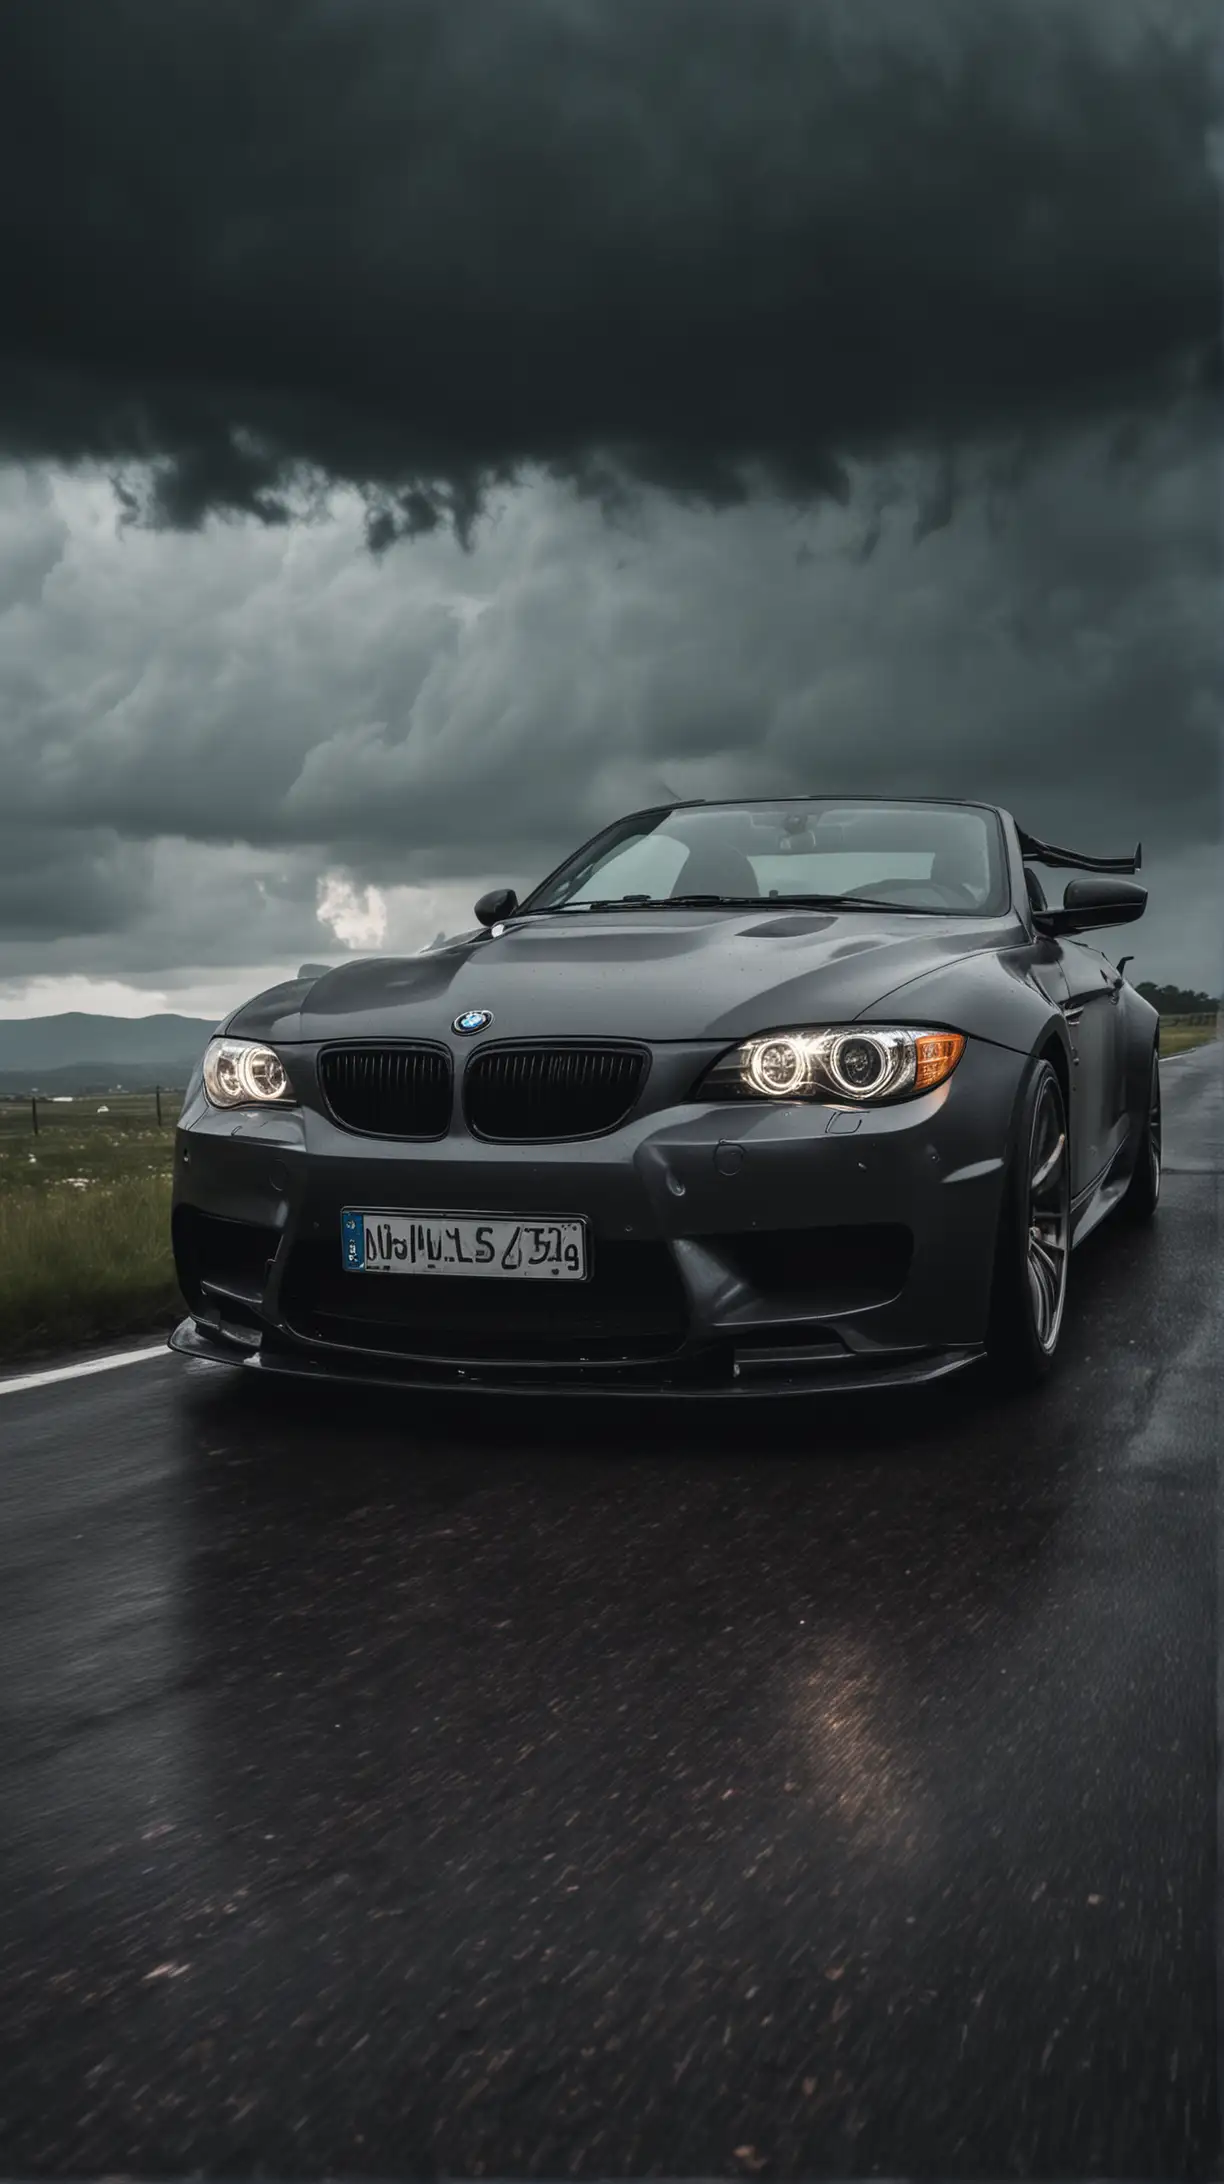 BMW super sports car with headlights on against black clouds